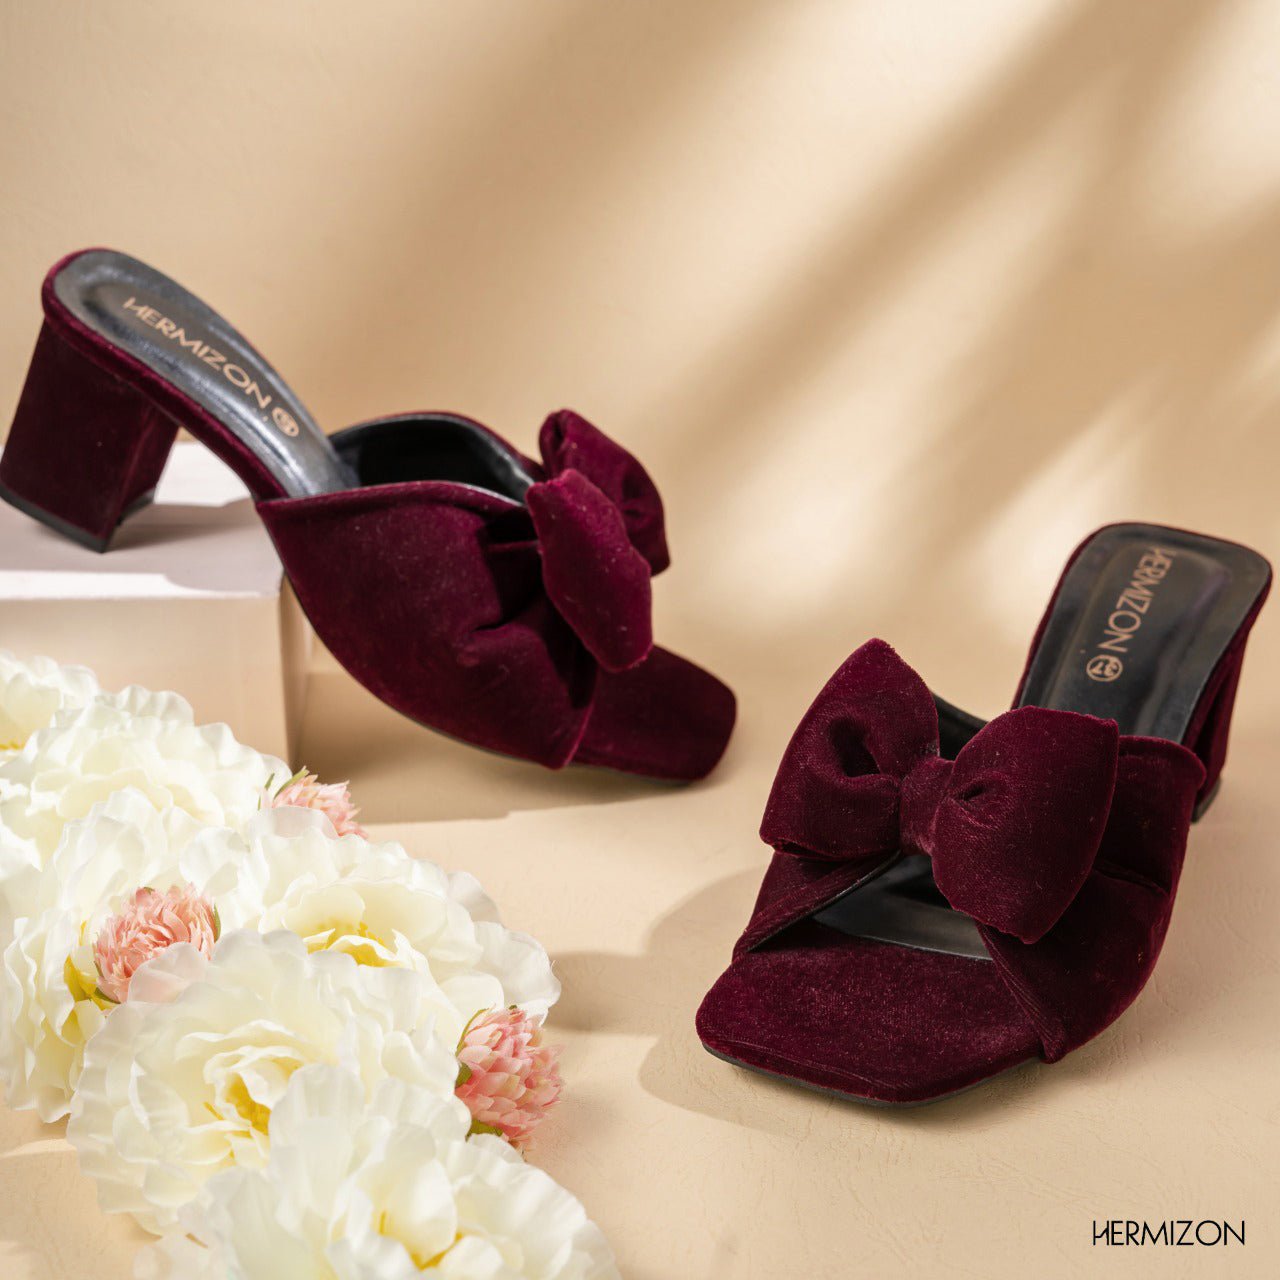 A marron color shoe from hermizon with black color sole